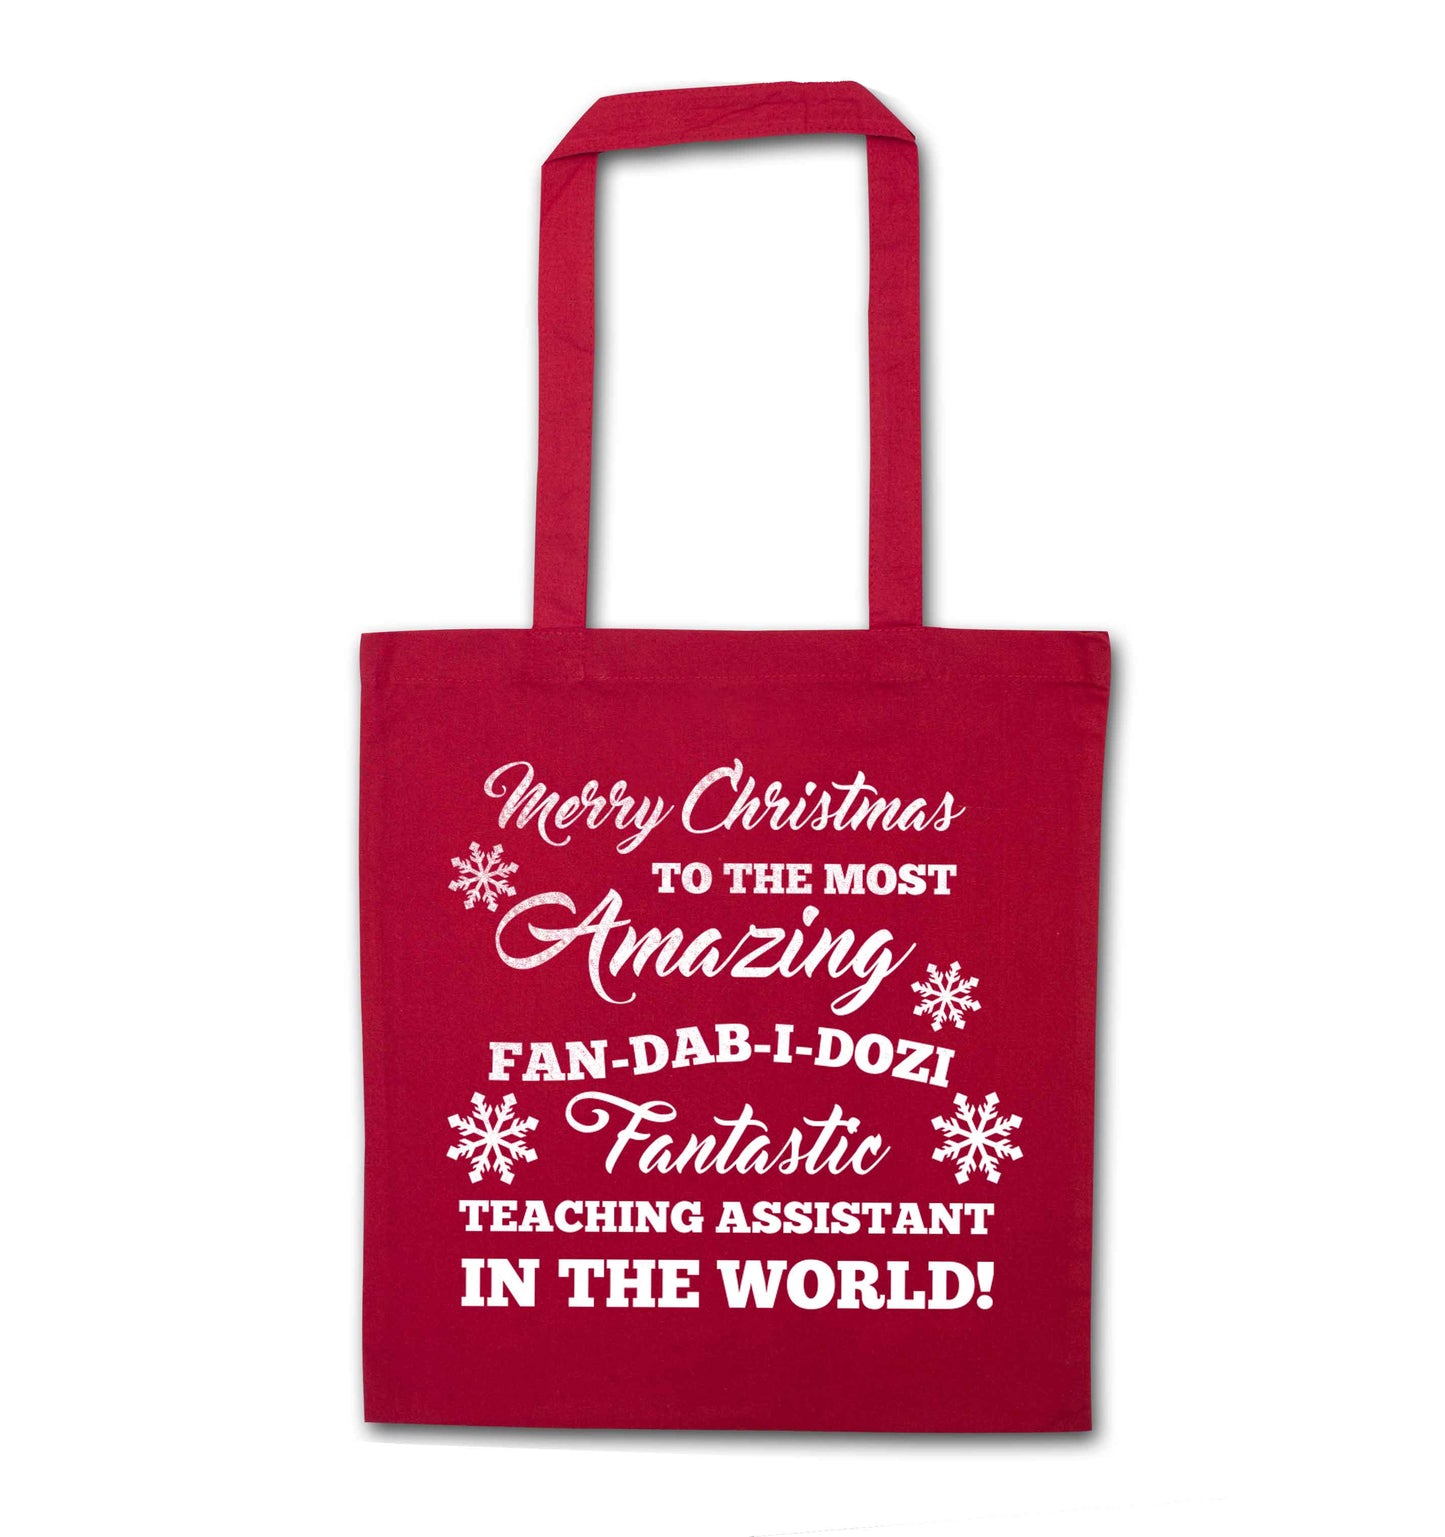 Merry Christmas to the most amazing fan-dab-i-dozi fantasic teaching assistant in the world red tote bag